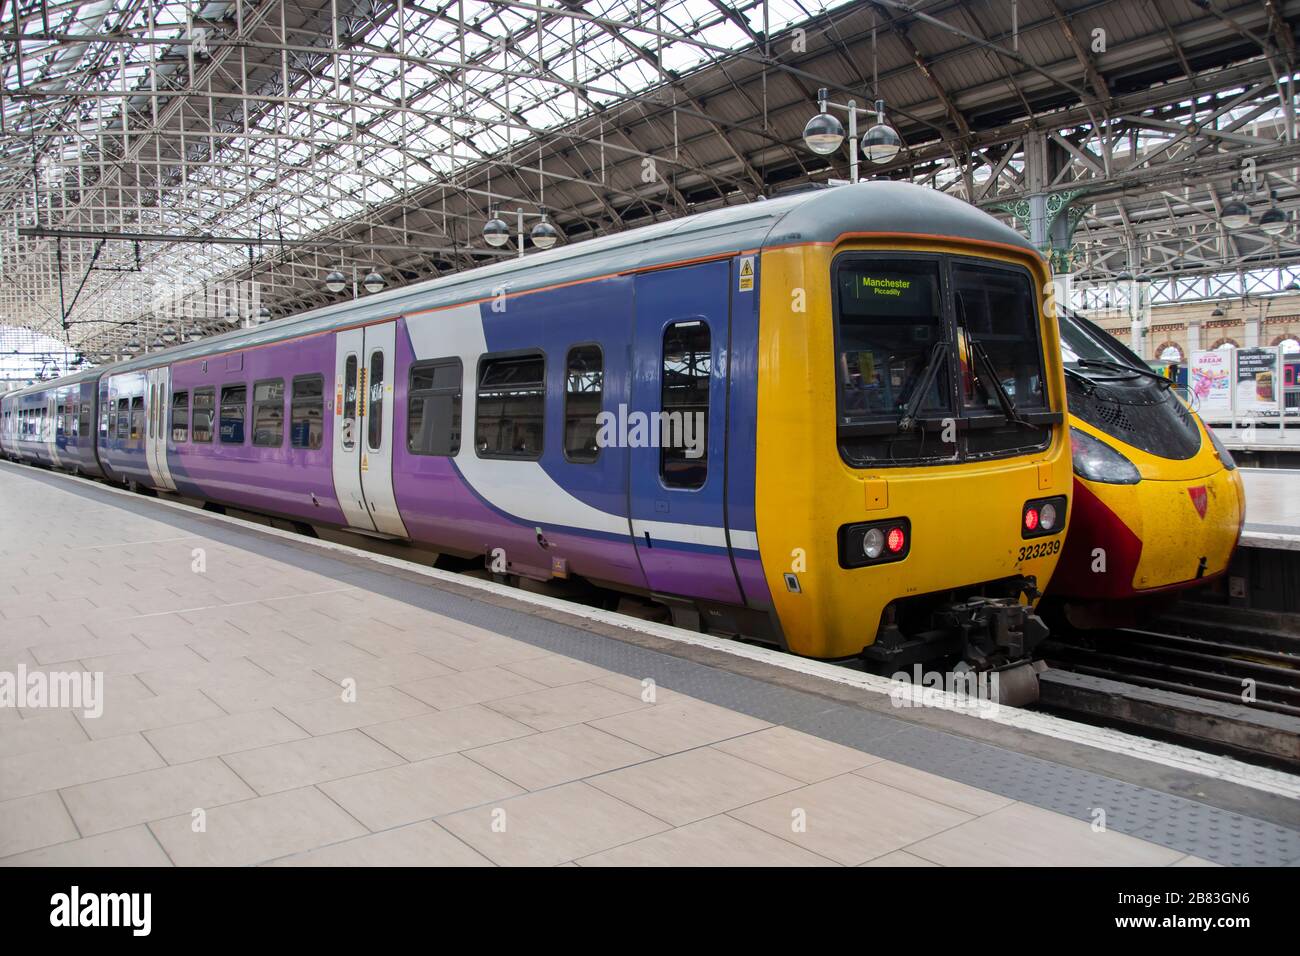 Northern Trains Class 323 electric multiple-unit train at Piccadilly Station, Manchester, England Stock Photo